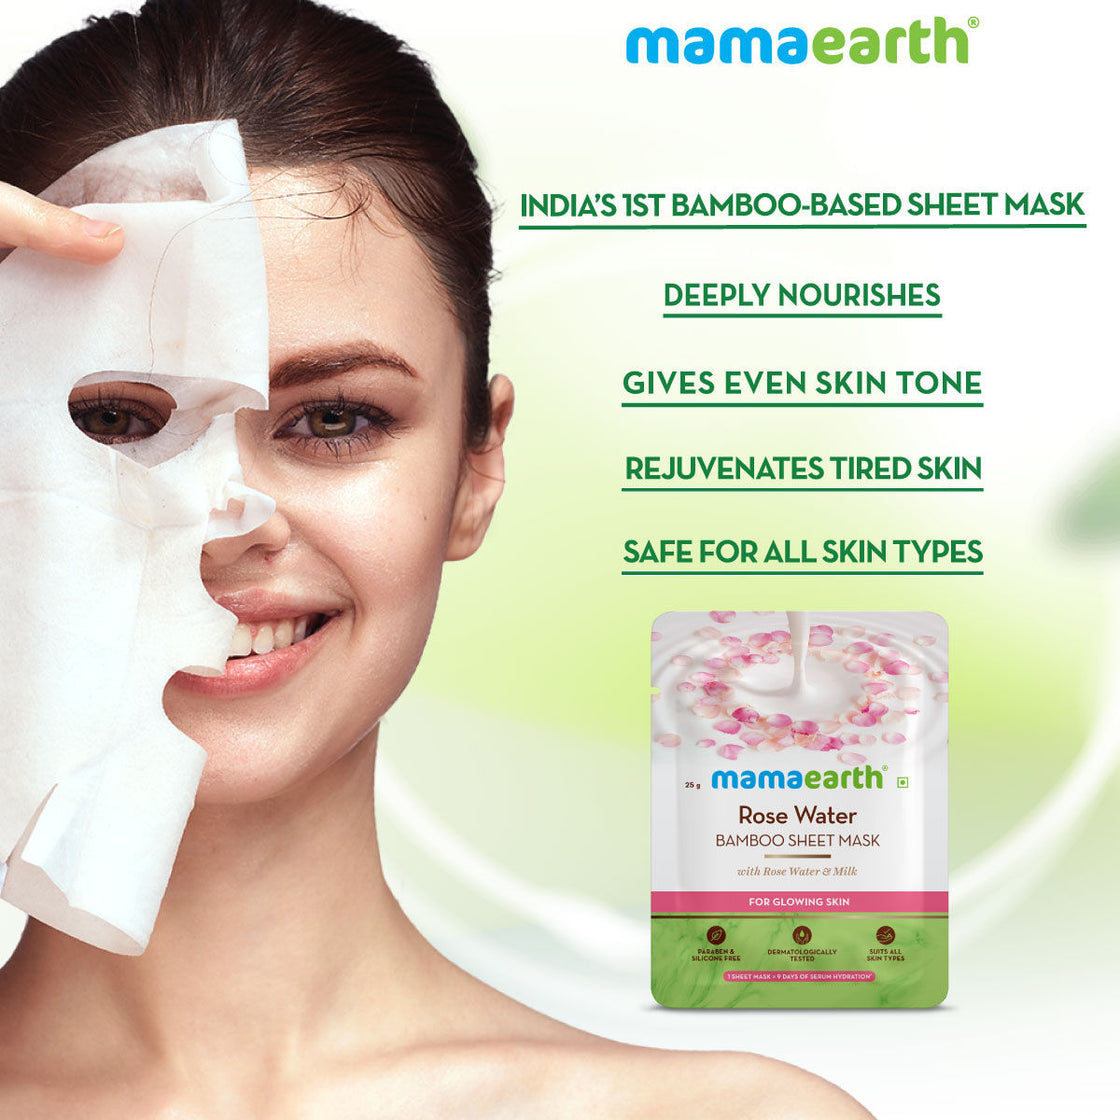 Mamaearth Rose Water Bamboo Sheet Mask With Rose Water & Milk For Glowing Skin-3